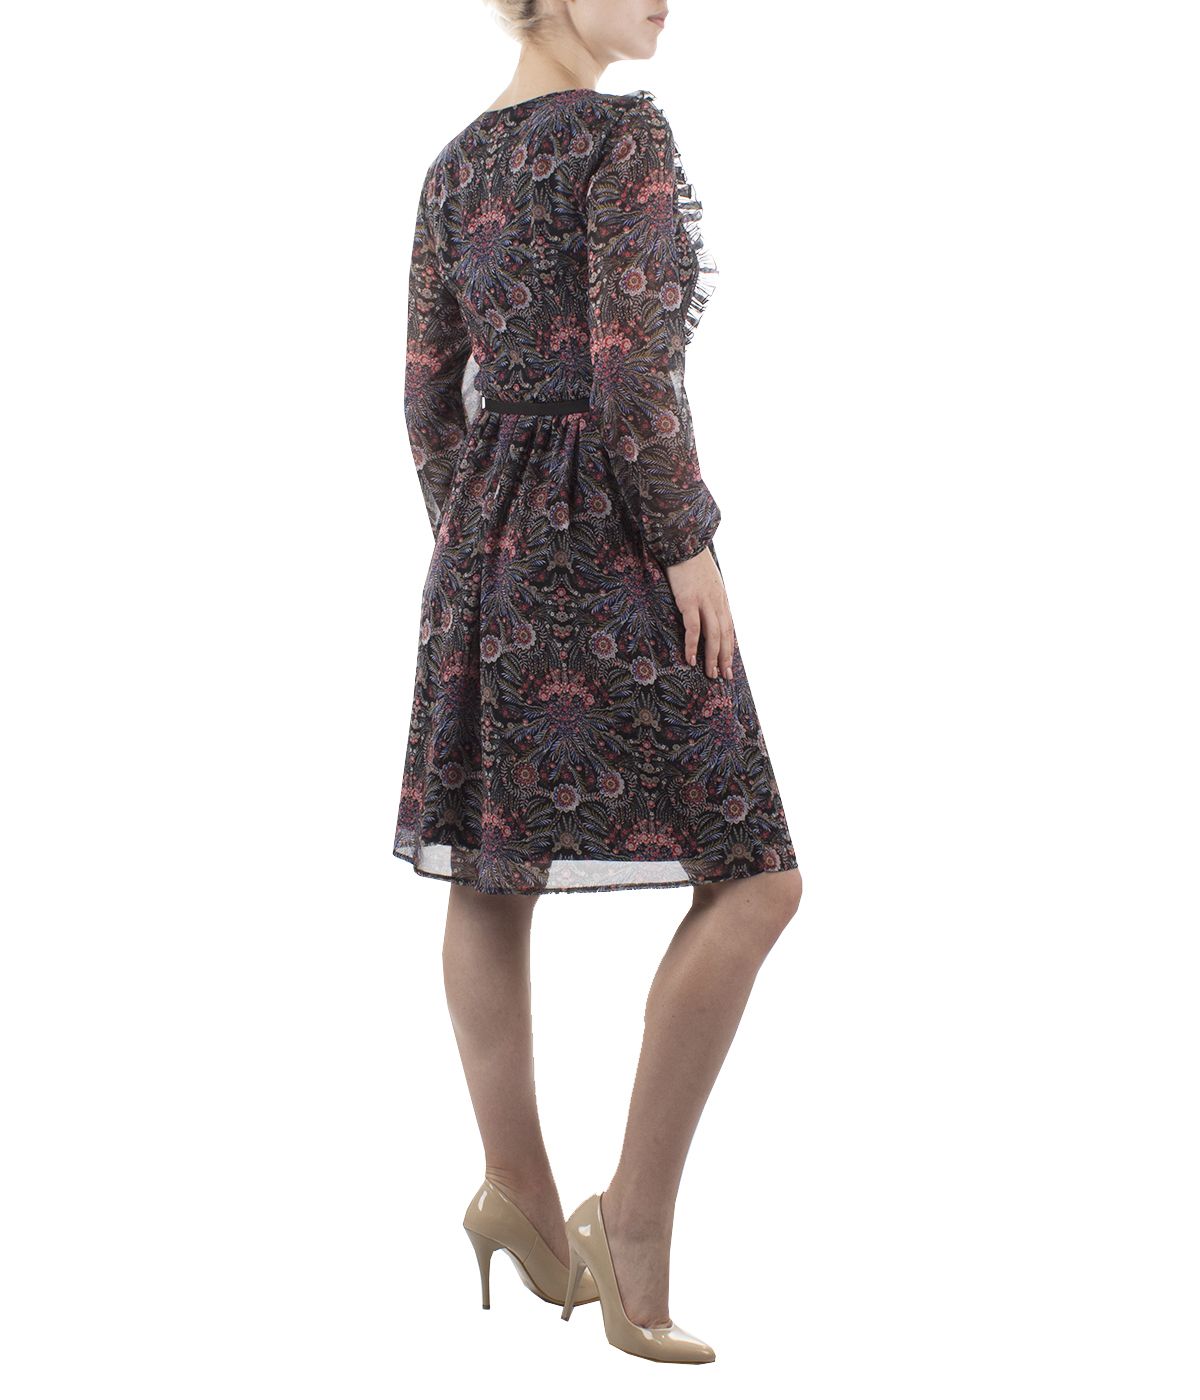 Chiffon dress with long sleeves, emphasized waist, with paisley print  5